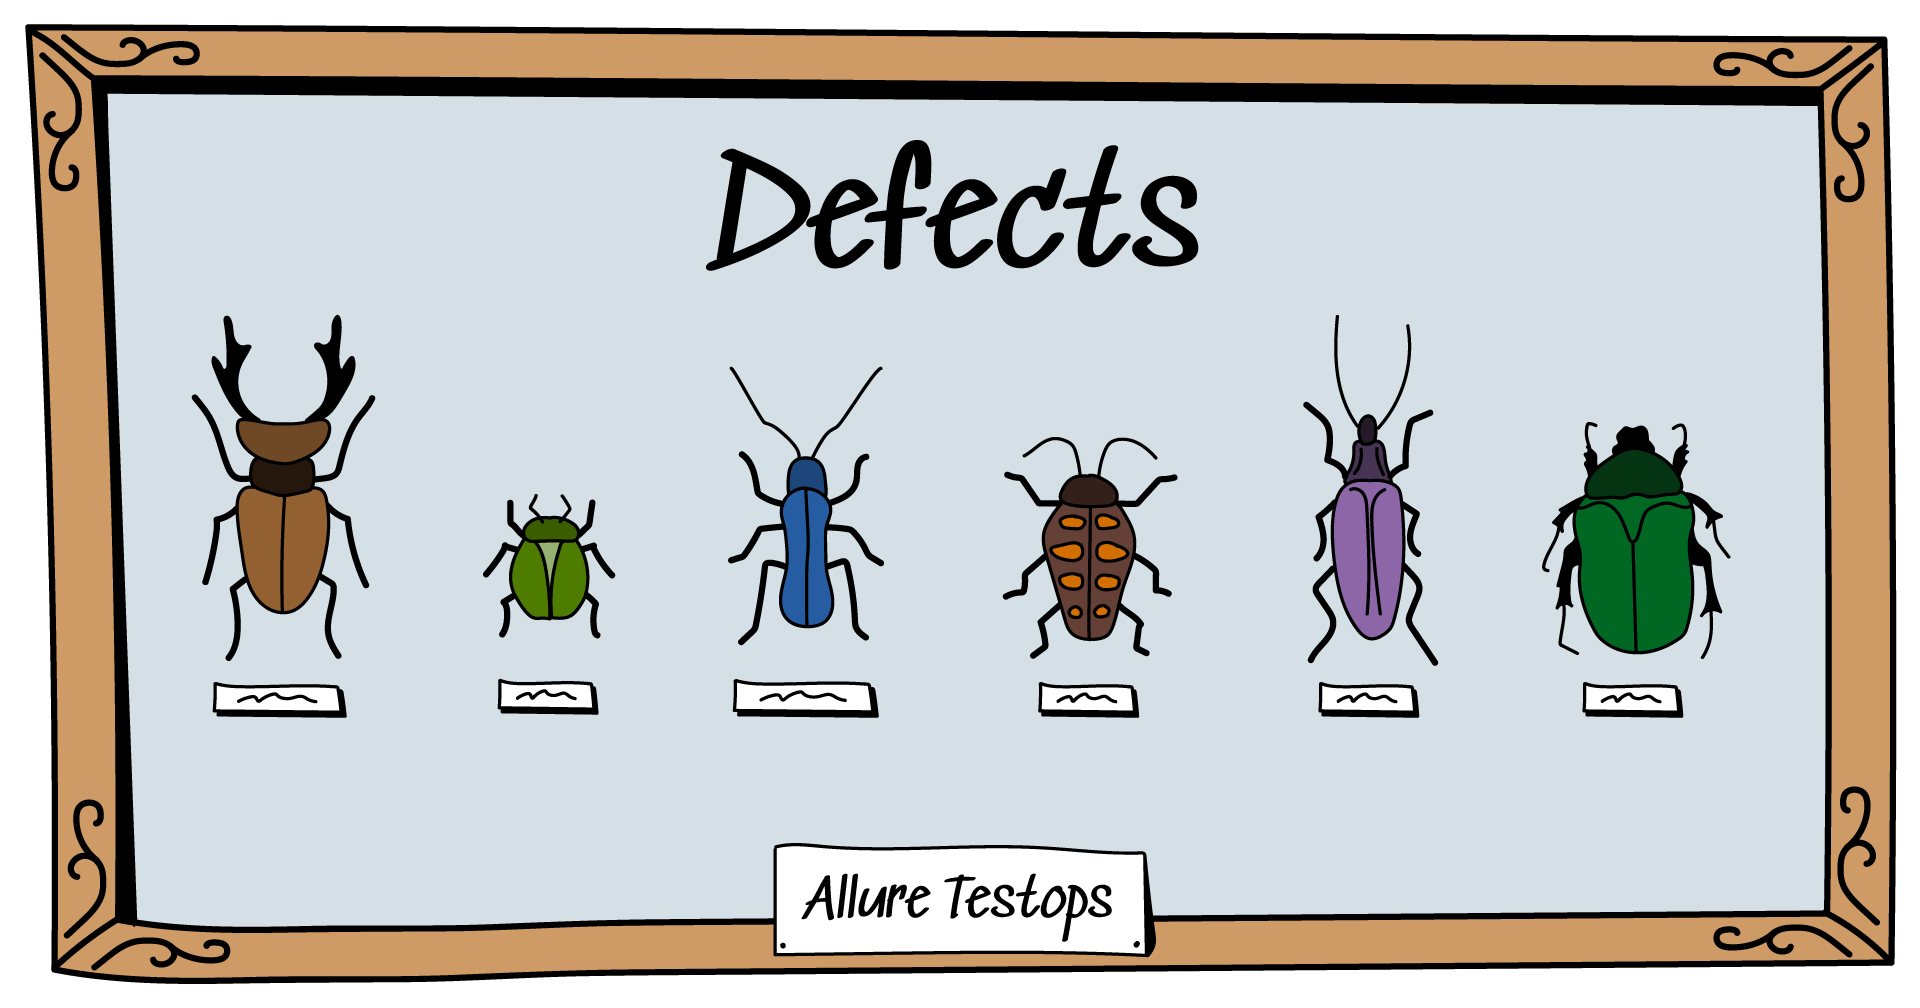 Defects in Allure TestOps, step by step